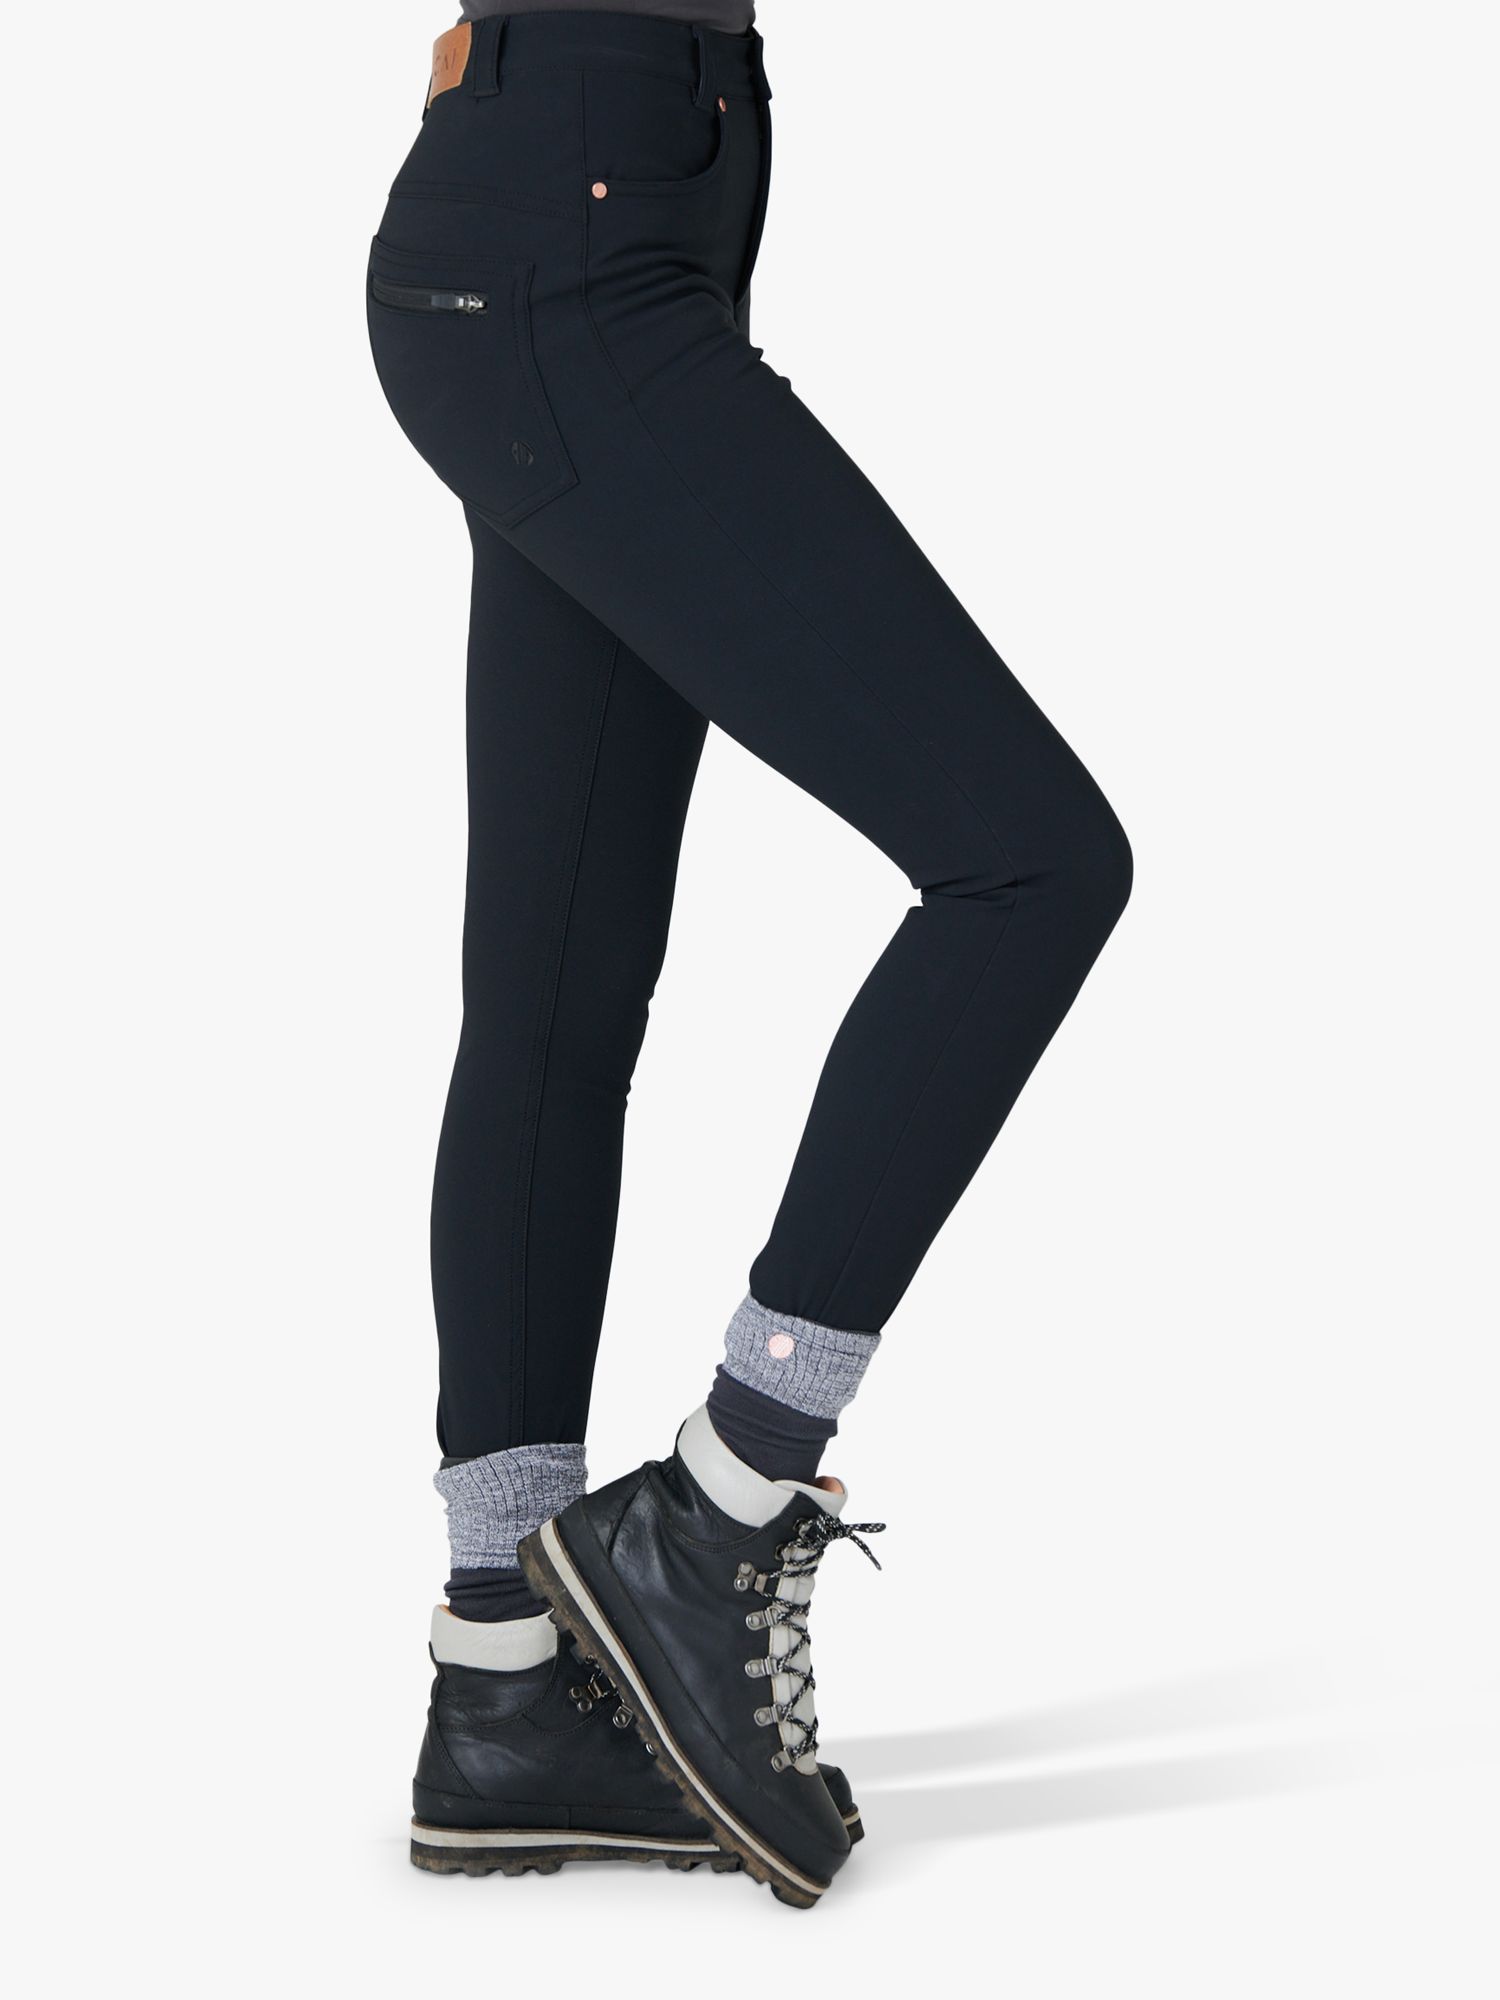 Buy ACAI Aventutite Stretch Skinny Outdoor Trousers Online at johnlewis.com